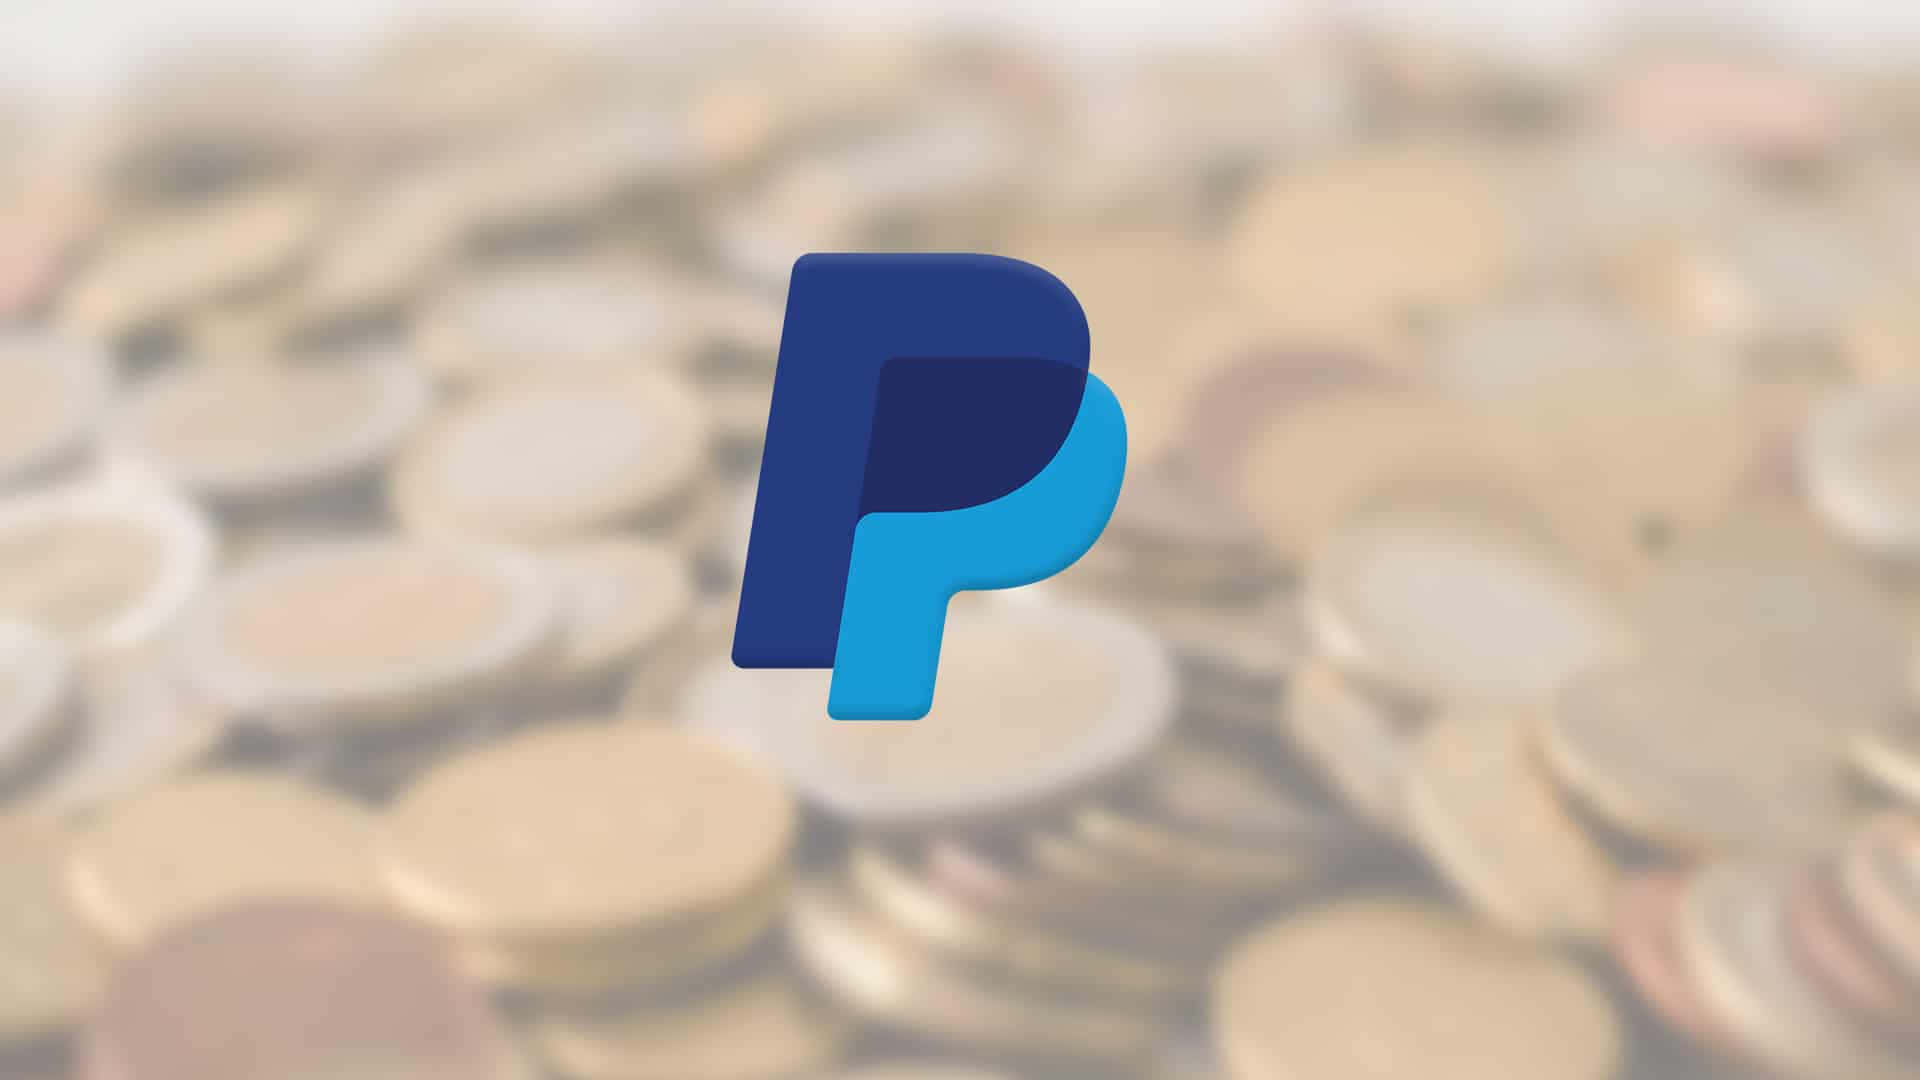 Make secure transactions with PayPal